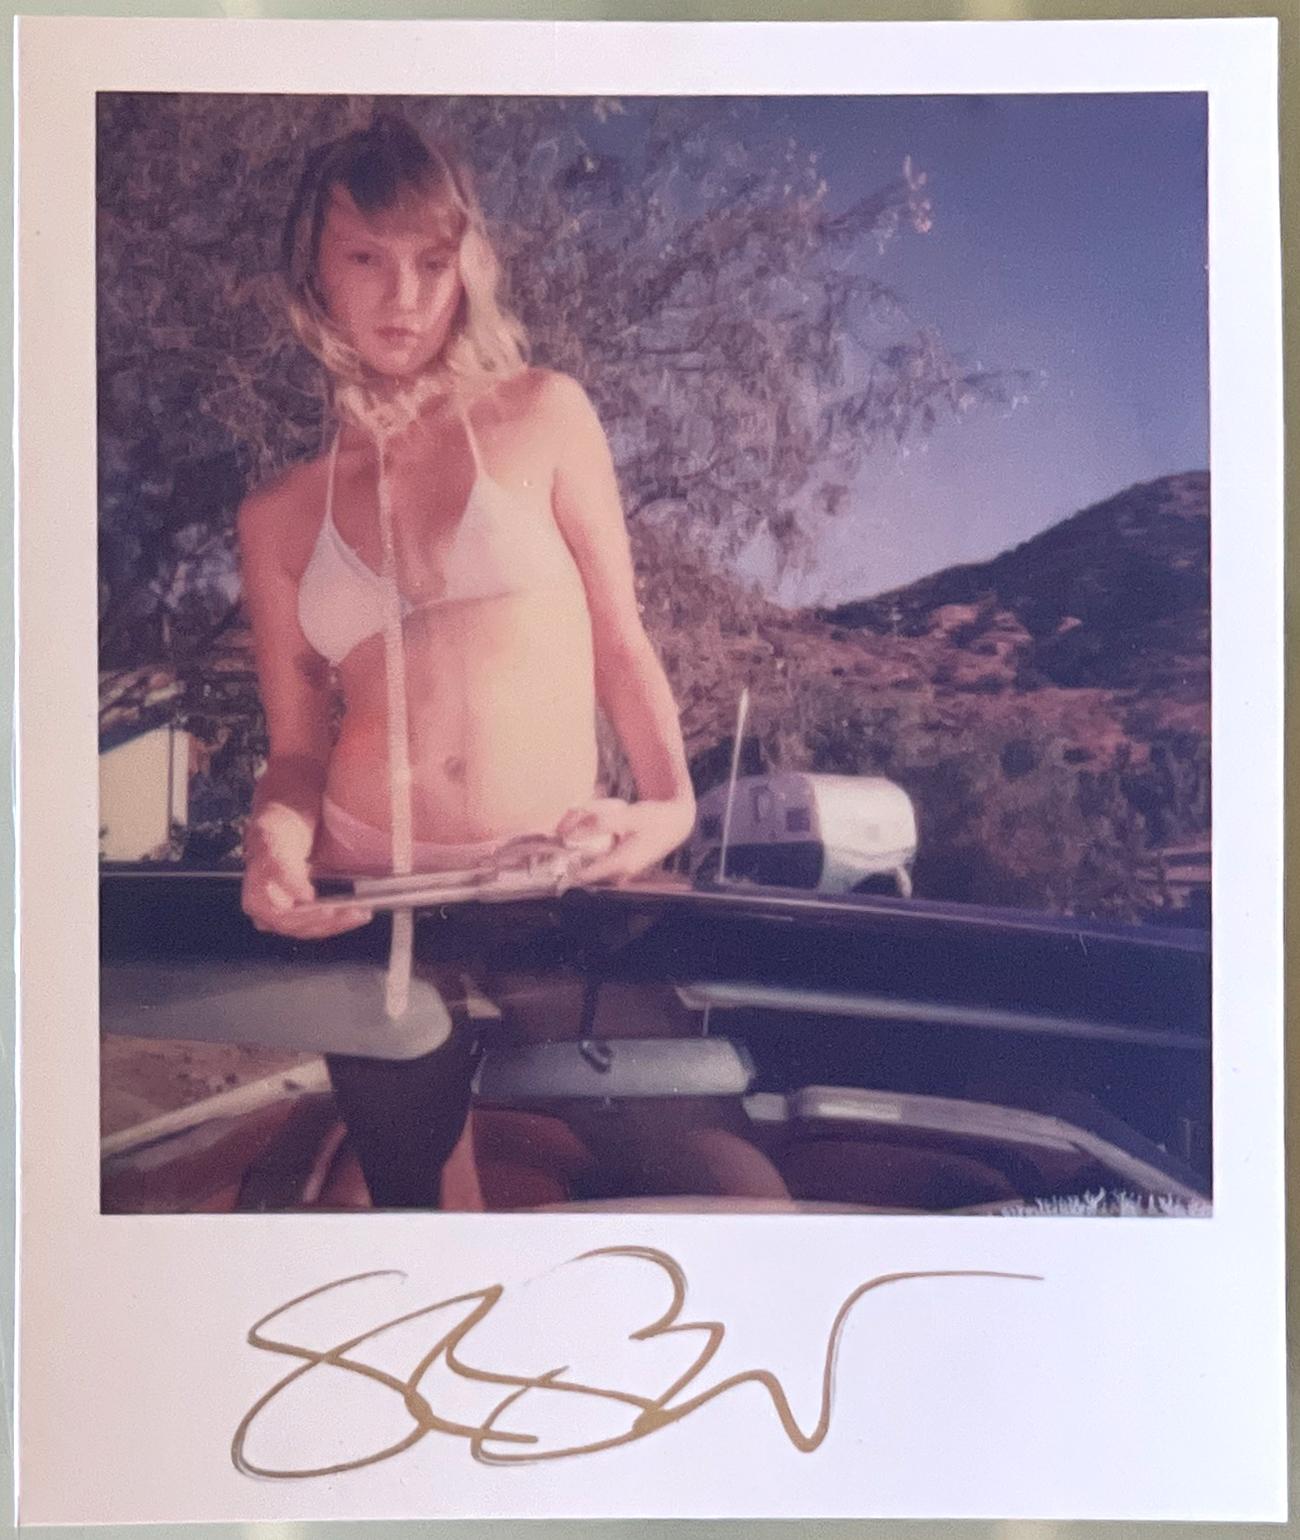 Stefanie Schneider's Mini
Nastasia with Gun (High Desert) - 2019

1 Archival Color Photograph based on the Polaroid.
Signed in front, not mounted.

Polaroid sized open Editions 1999-2022
10.7 x 8.8cm (Image 7.9x7.7cm)